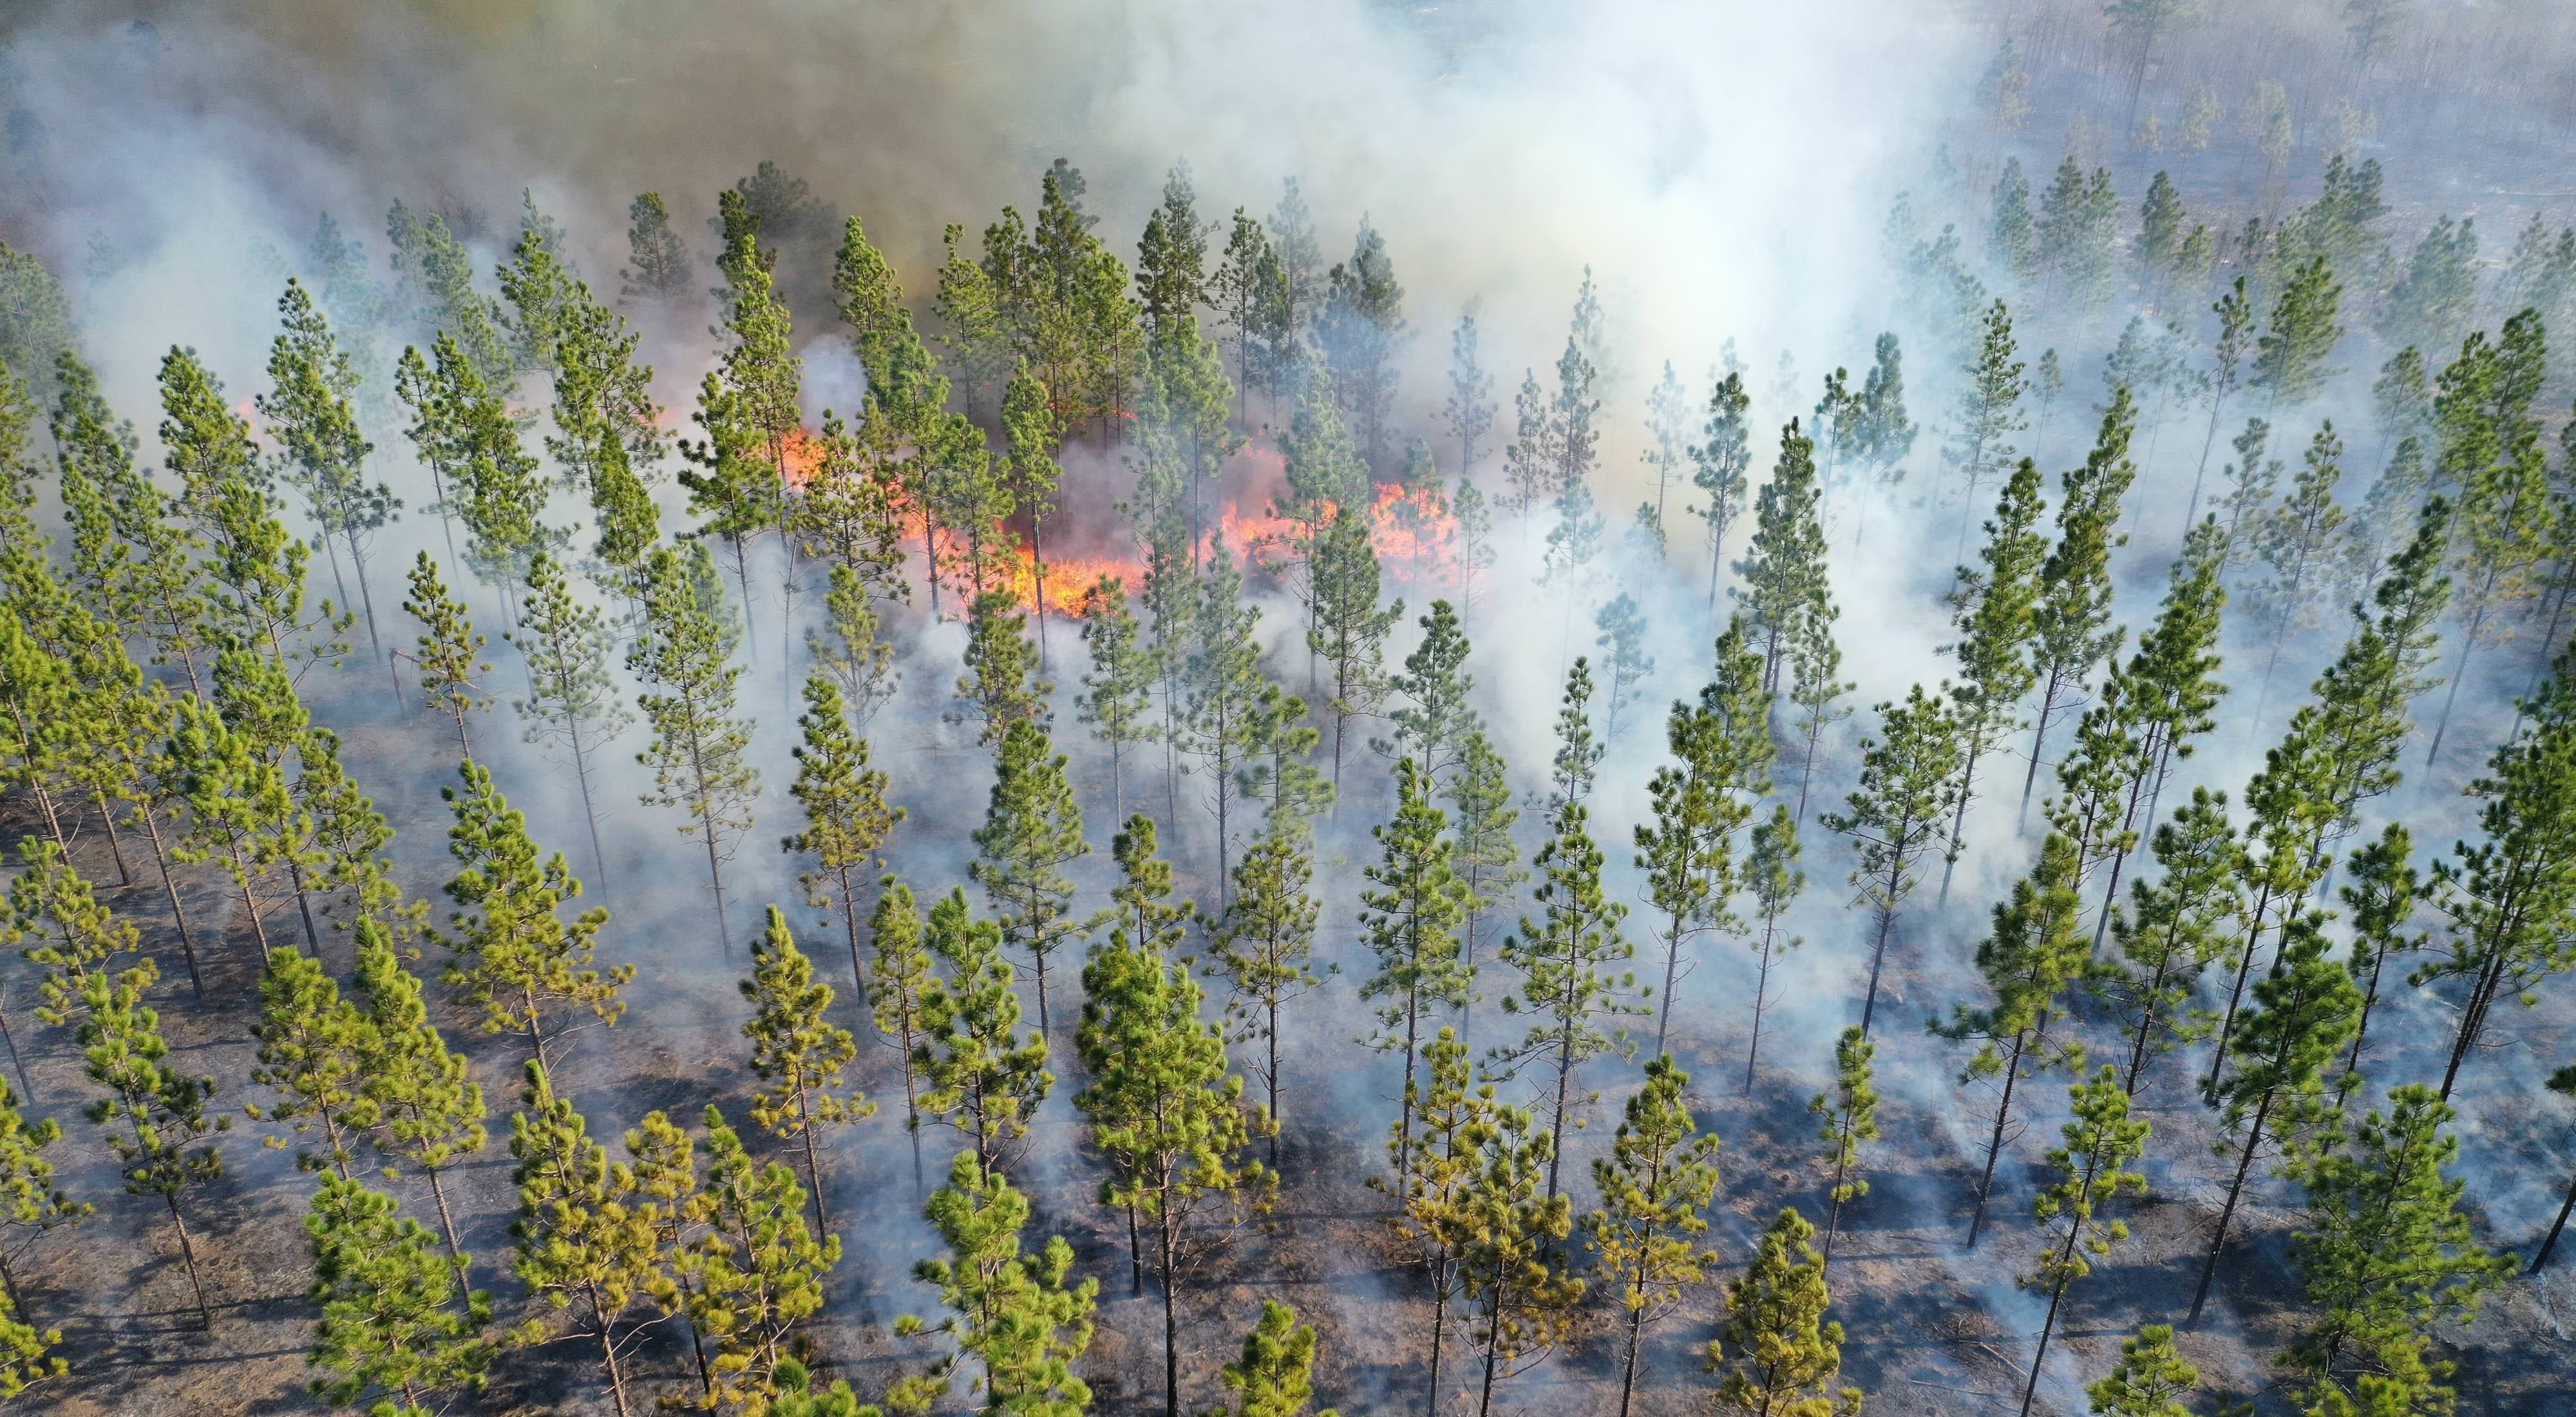 Flames and smoke in a pine forest viewed from the air.